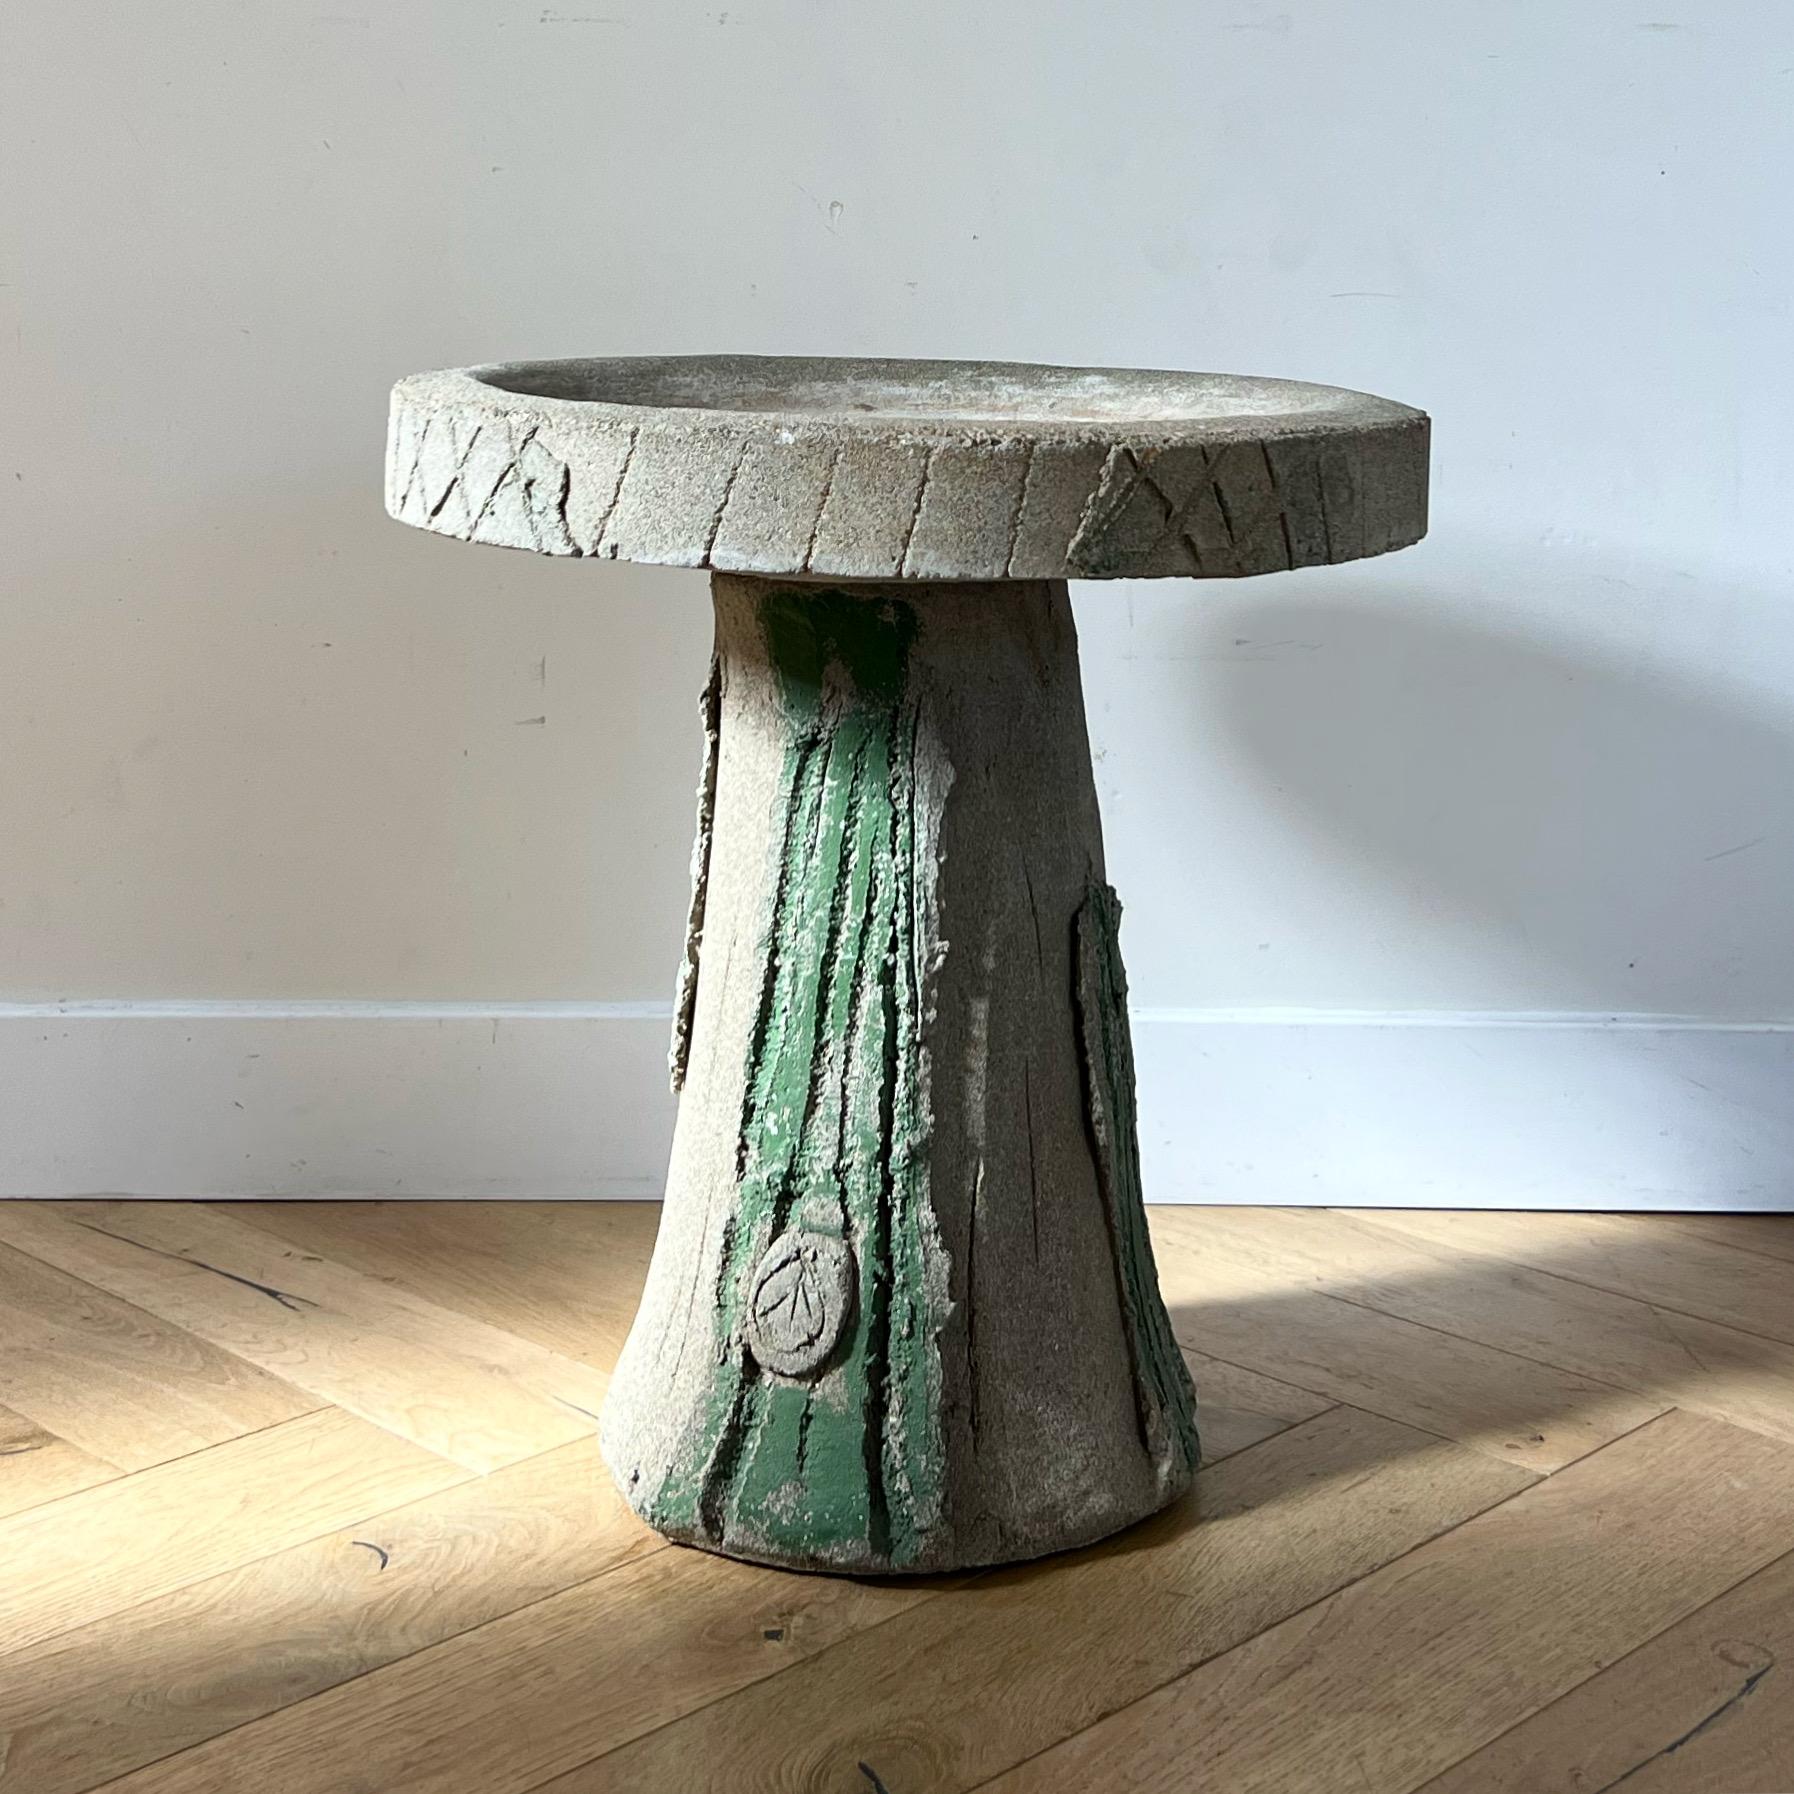 A hand-crafted brutalist cement accent table, 1970s. Could also work as a birdbath. Ash with tennis-court-green accents. Brutally unique - one of a kind. Minor signs of age but overall fabulous condition. Pick up in central west Los Angeles or